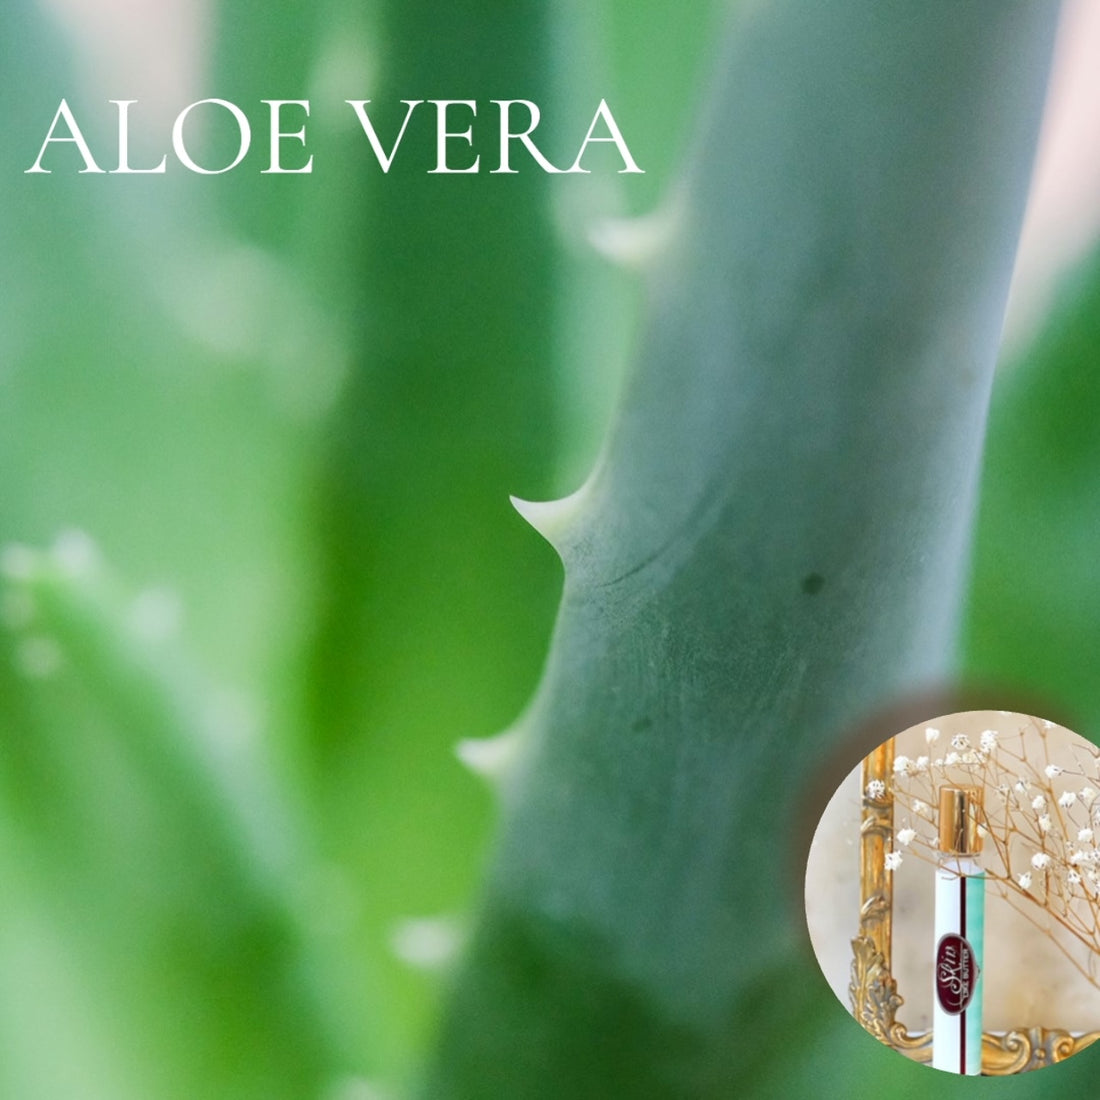 ALOE VERA JUICE scented Travel Perfume in a Roll on or Spray bottle ~  Buy 1 get 1 50% off-use coupon code 2PLEASE